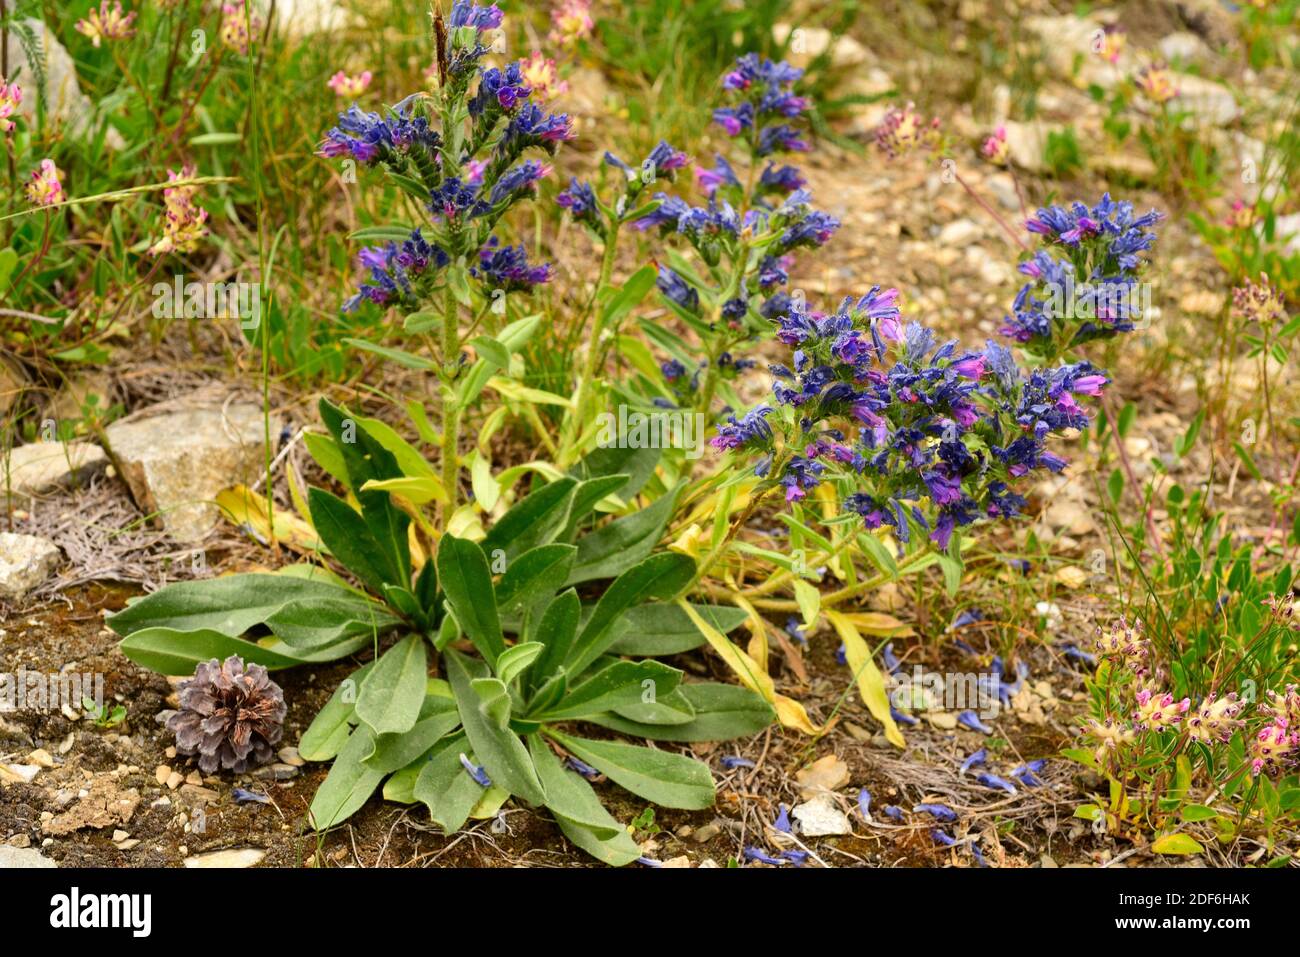 Blueweed or viper bugloss (Echium vulgare) is a biennial or perennial herb native of Europe and Asia. This photo was taken in Andorra Pyrenees. Stock Photo